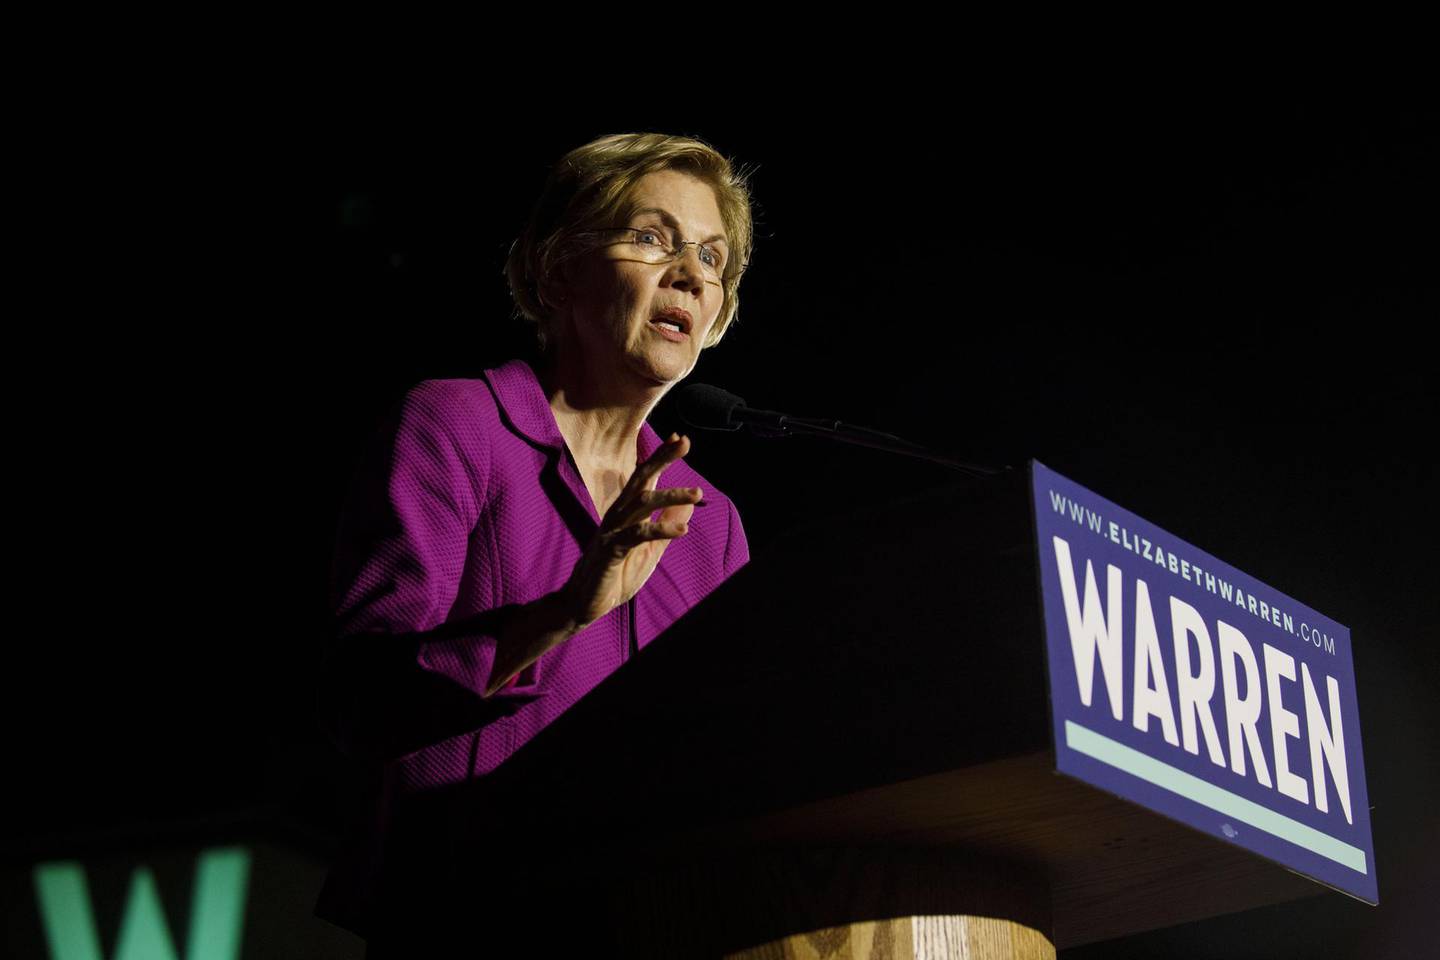 Senator Elizabeth Warren, a Democrat from Massachusetts and 2020 presidential candidate, speaks during a campaign event at East Los Angeles Community College in Monterey Park, California, U.S., on Monday, March 2, 2020. Joe Biden is consolidating support for his Democratic presidential campaign as centrists line up behind him to effectively try to block Bernie Sanders from winning the party's nomination. Photographer: Patrick T. Fallon/Bloomberg